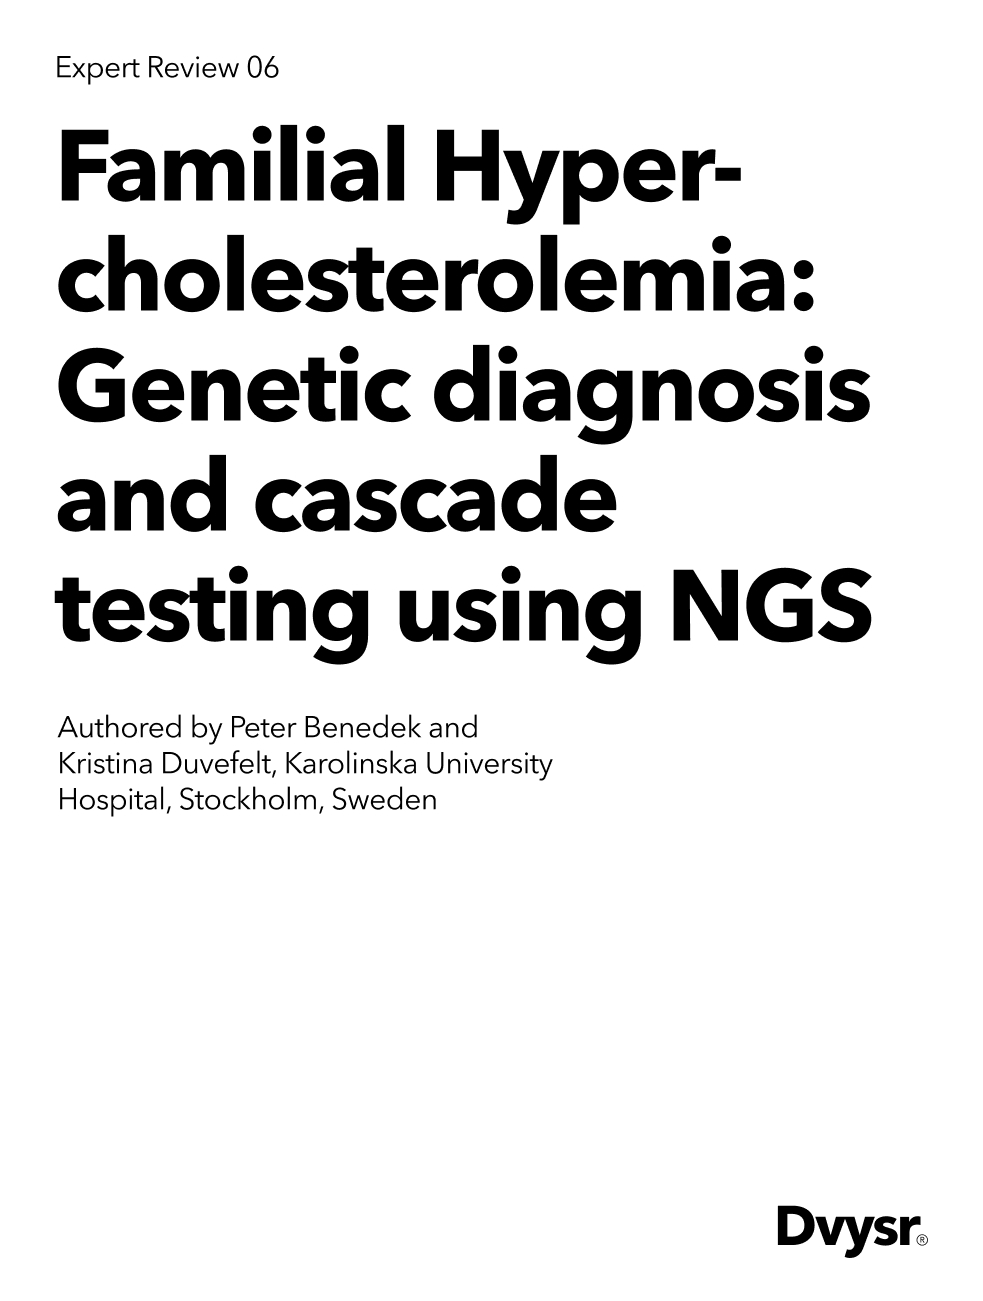 Familial hypercholesterolemia: Genetic diagnosis and cascade testing using NGS